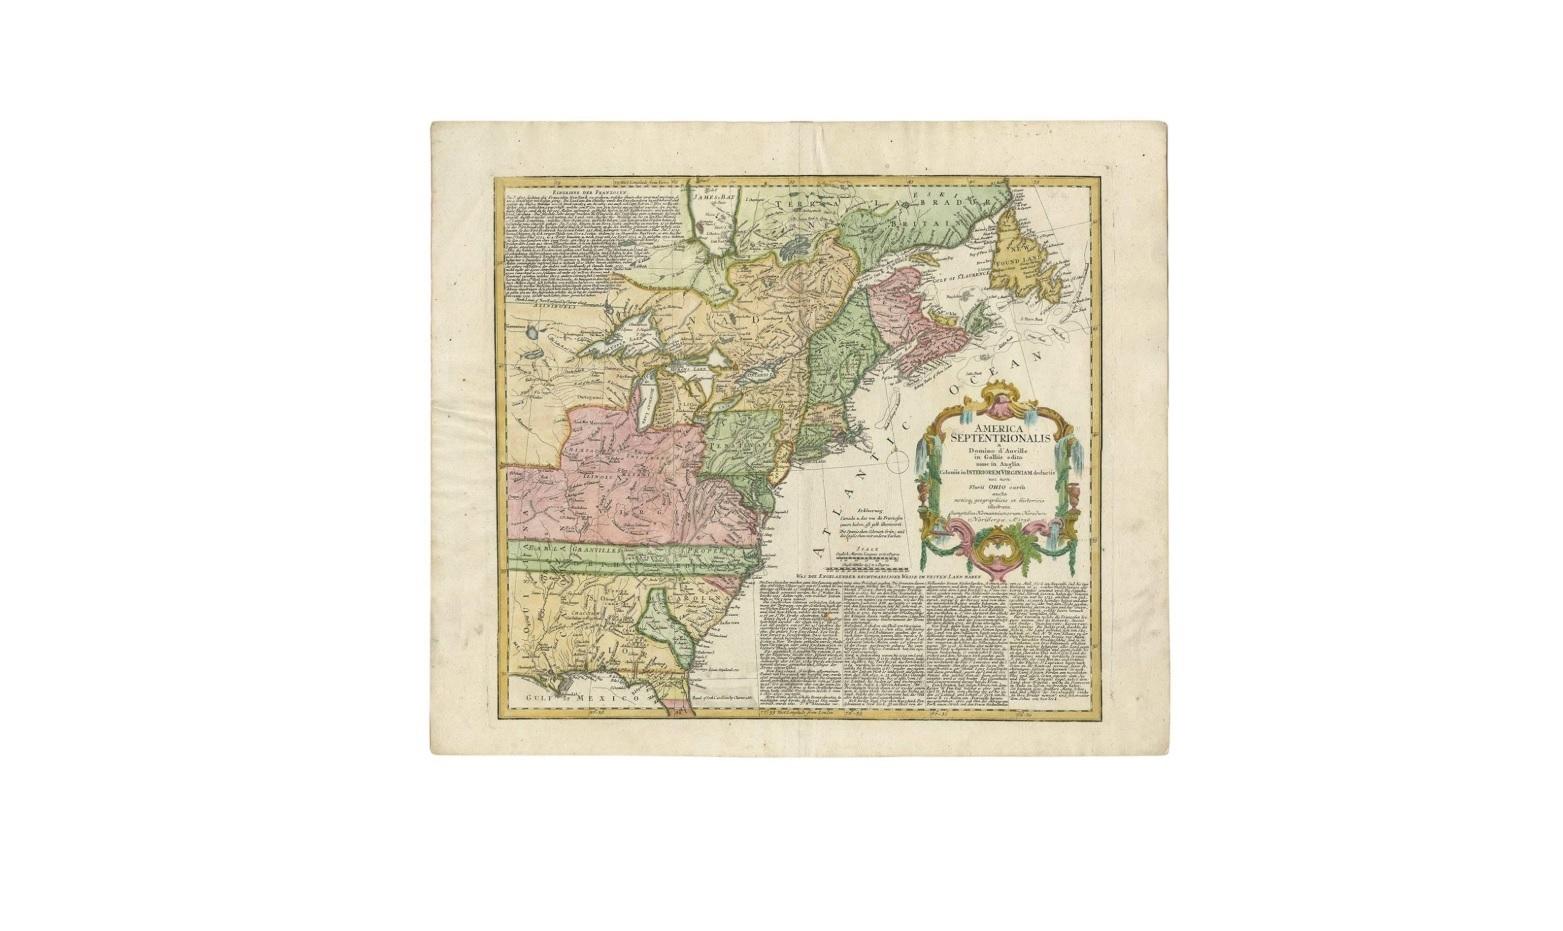 Scarce first edition of this fine early map of the British Colonies in North America at the outset of the French & Indian War. The map names and depicts many of the early boundary lines delineating the colonial charters, some with dates. Some of the